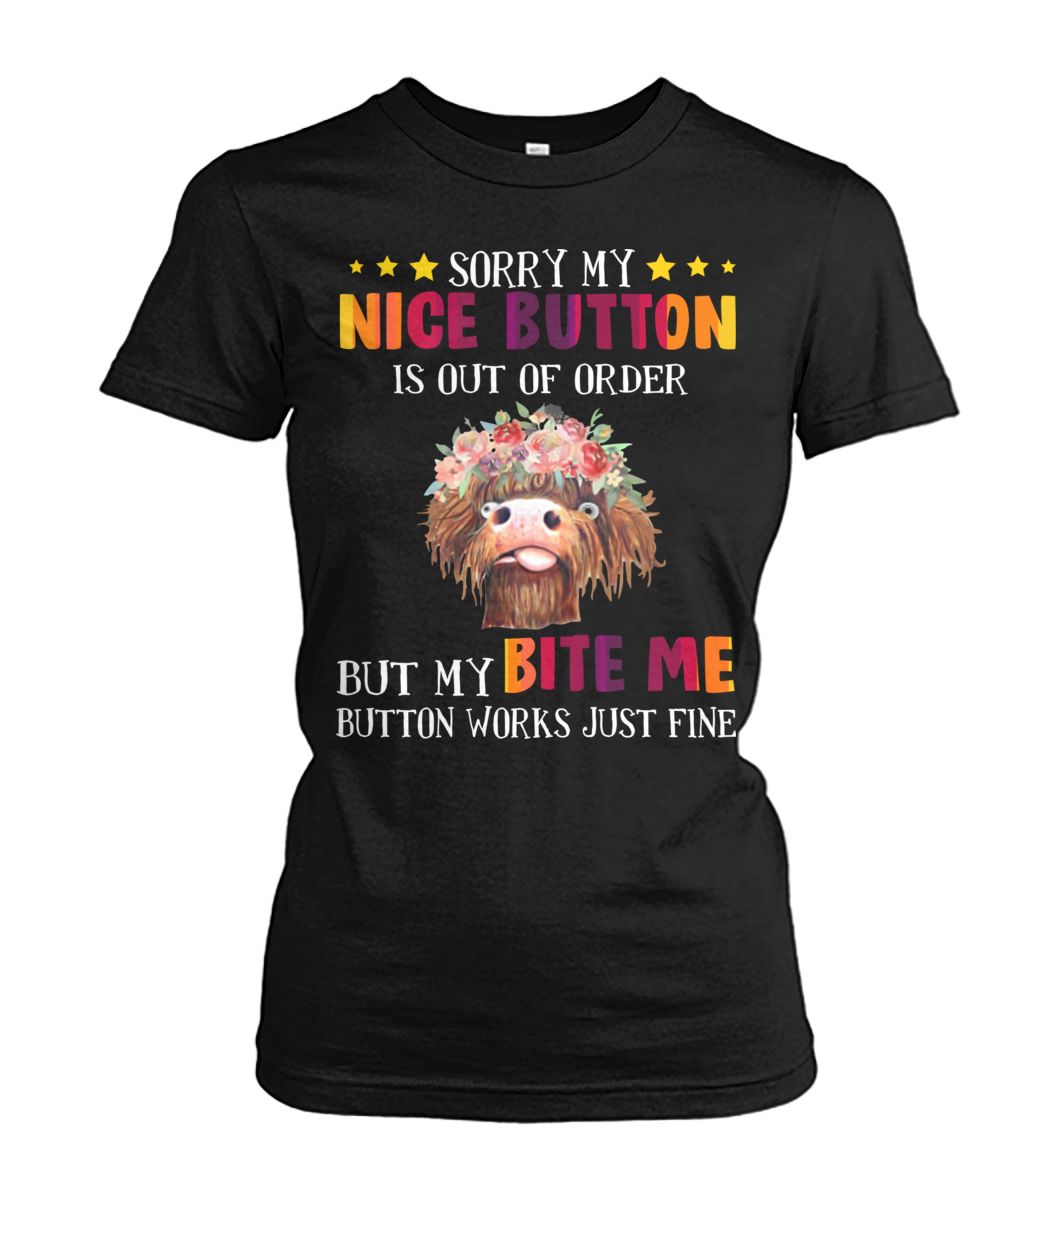 Sloth sorry my nice button is out of order but my bite me button works just fine women's crew tee